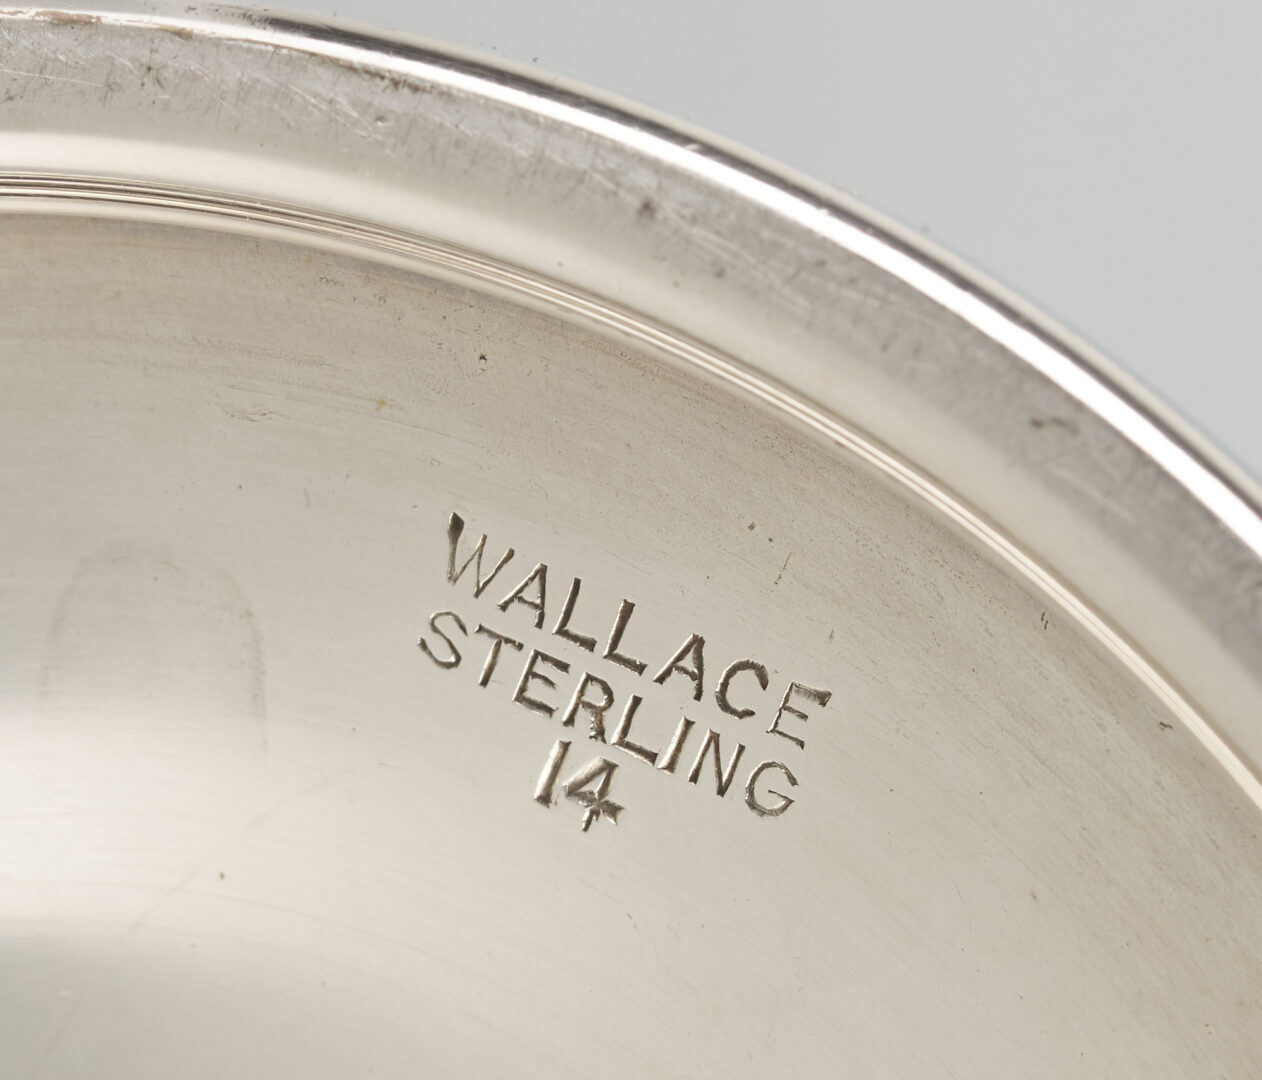 Lot 62: Set of 15 Wallace Sterling Silver Water Goblets